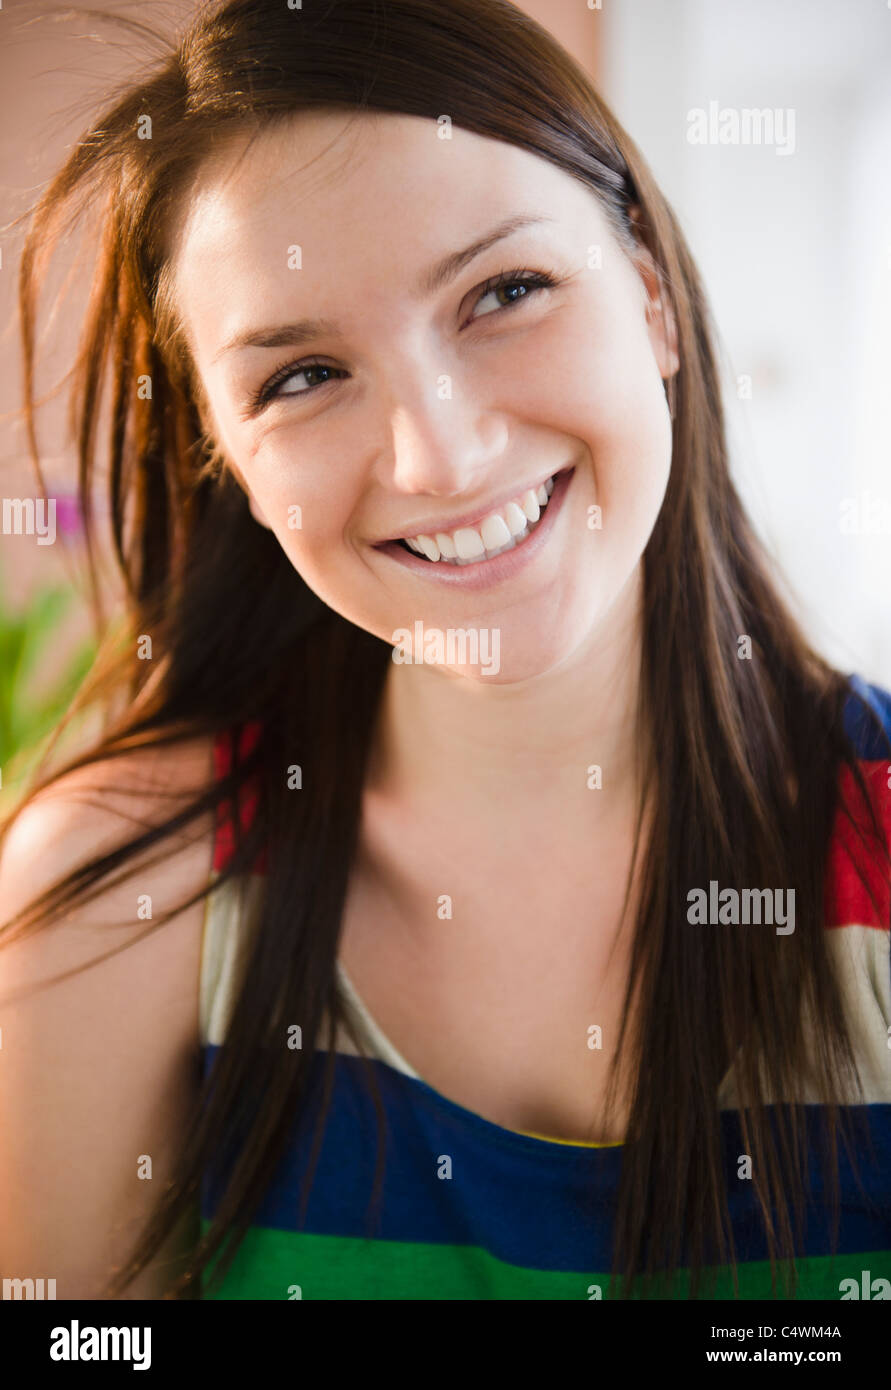 USA,New Jersey, Jersey City,Portrait of smiling young woman Banque D'Images